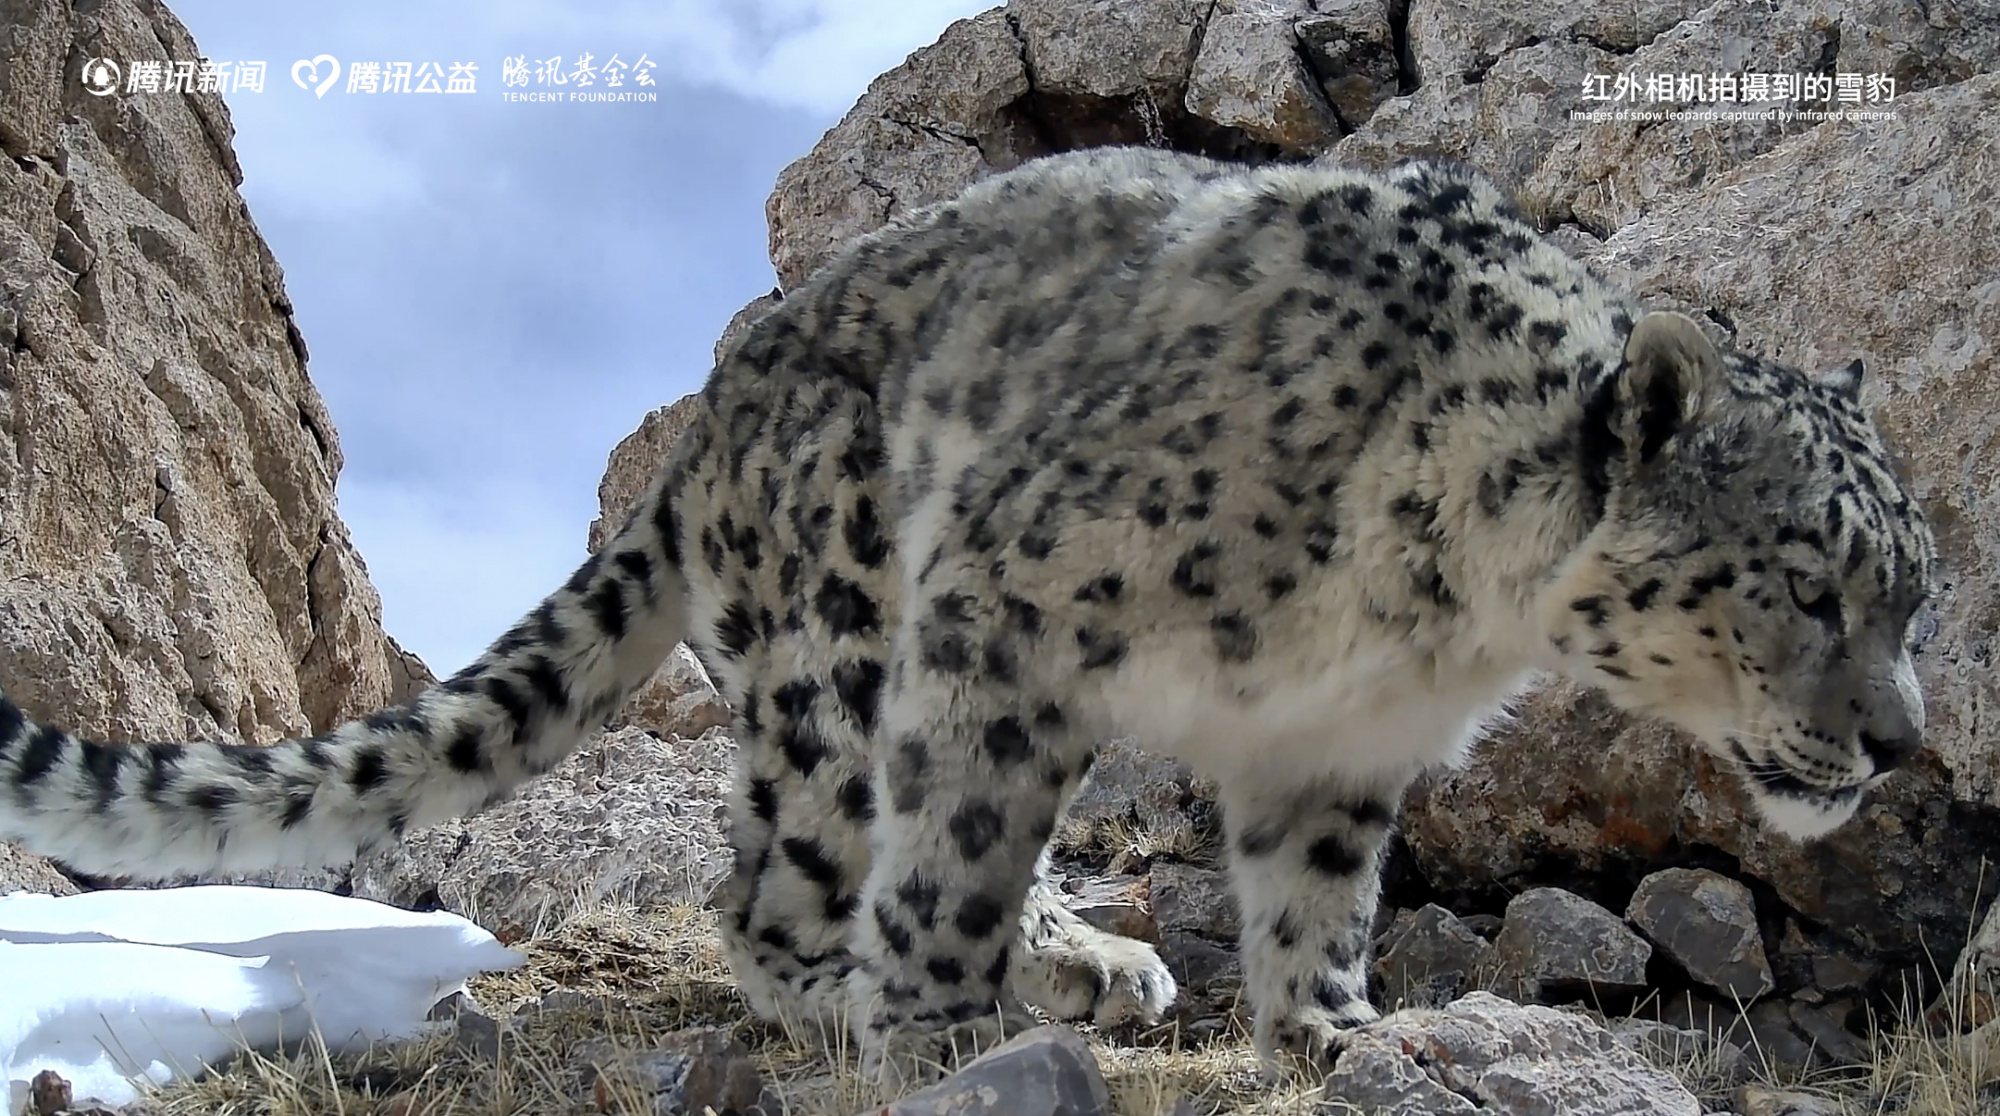 Snow Leopard Conservation Gets Boost from New Tech, Blog